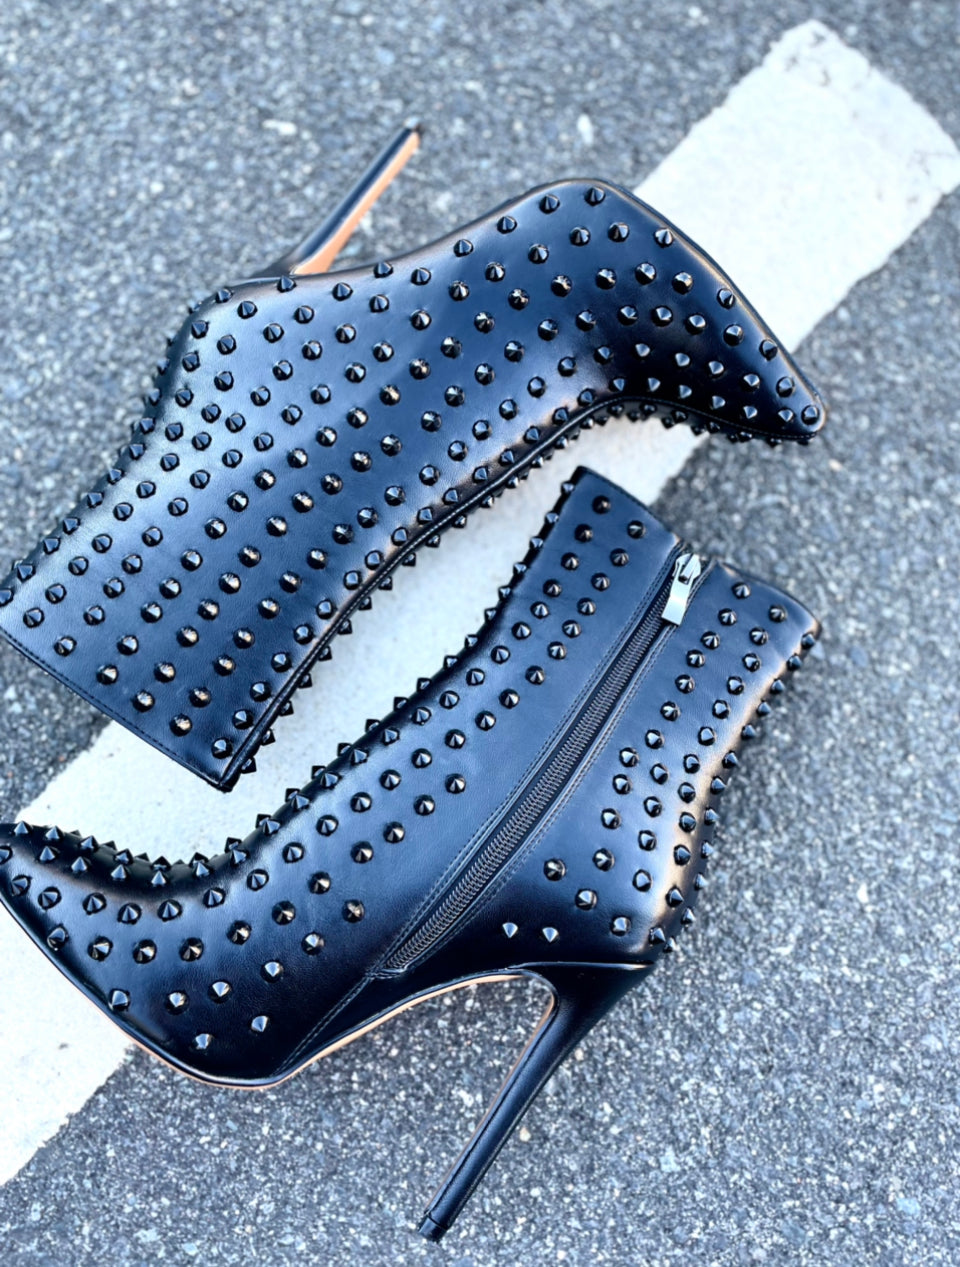 Black Studded stiletto booties are perfect for your winter fits. Shop these hot boots up to size 13. Now shipping at CoccaBee Shoes online